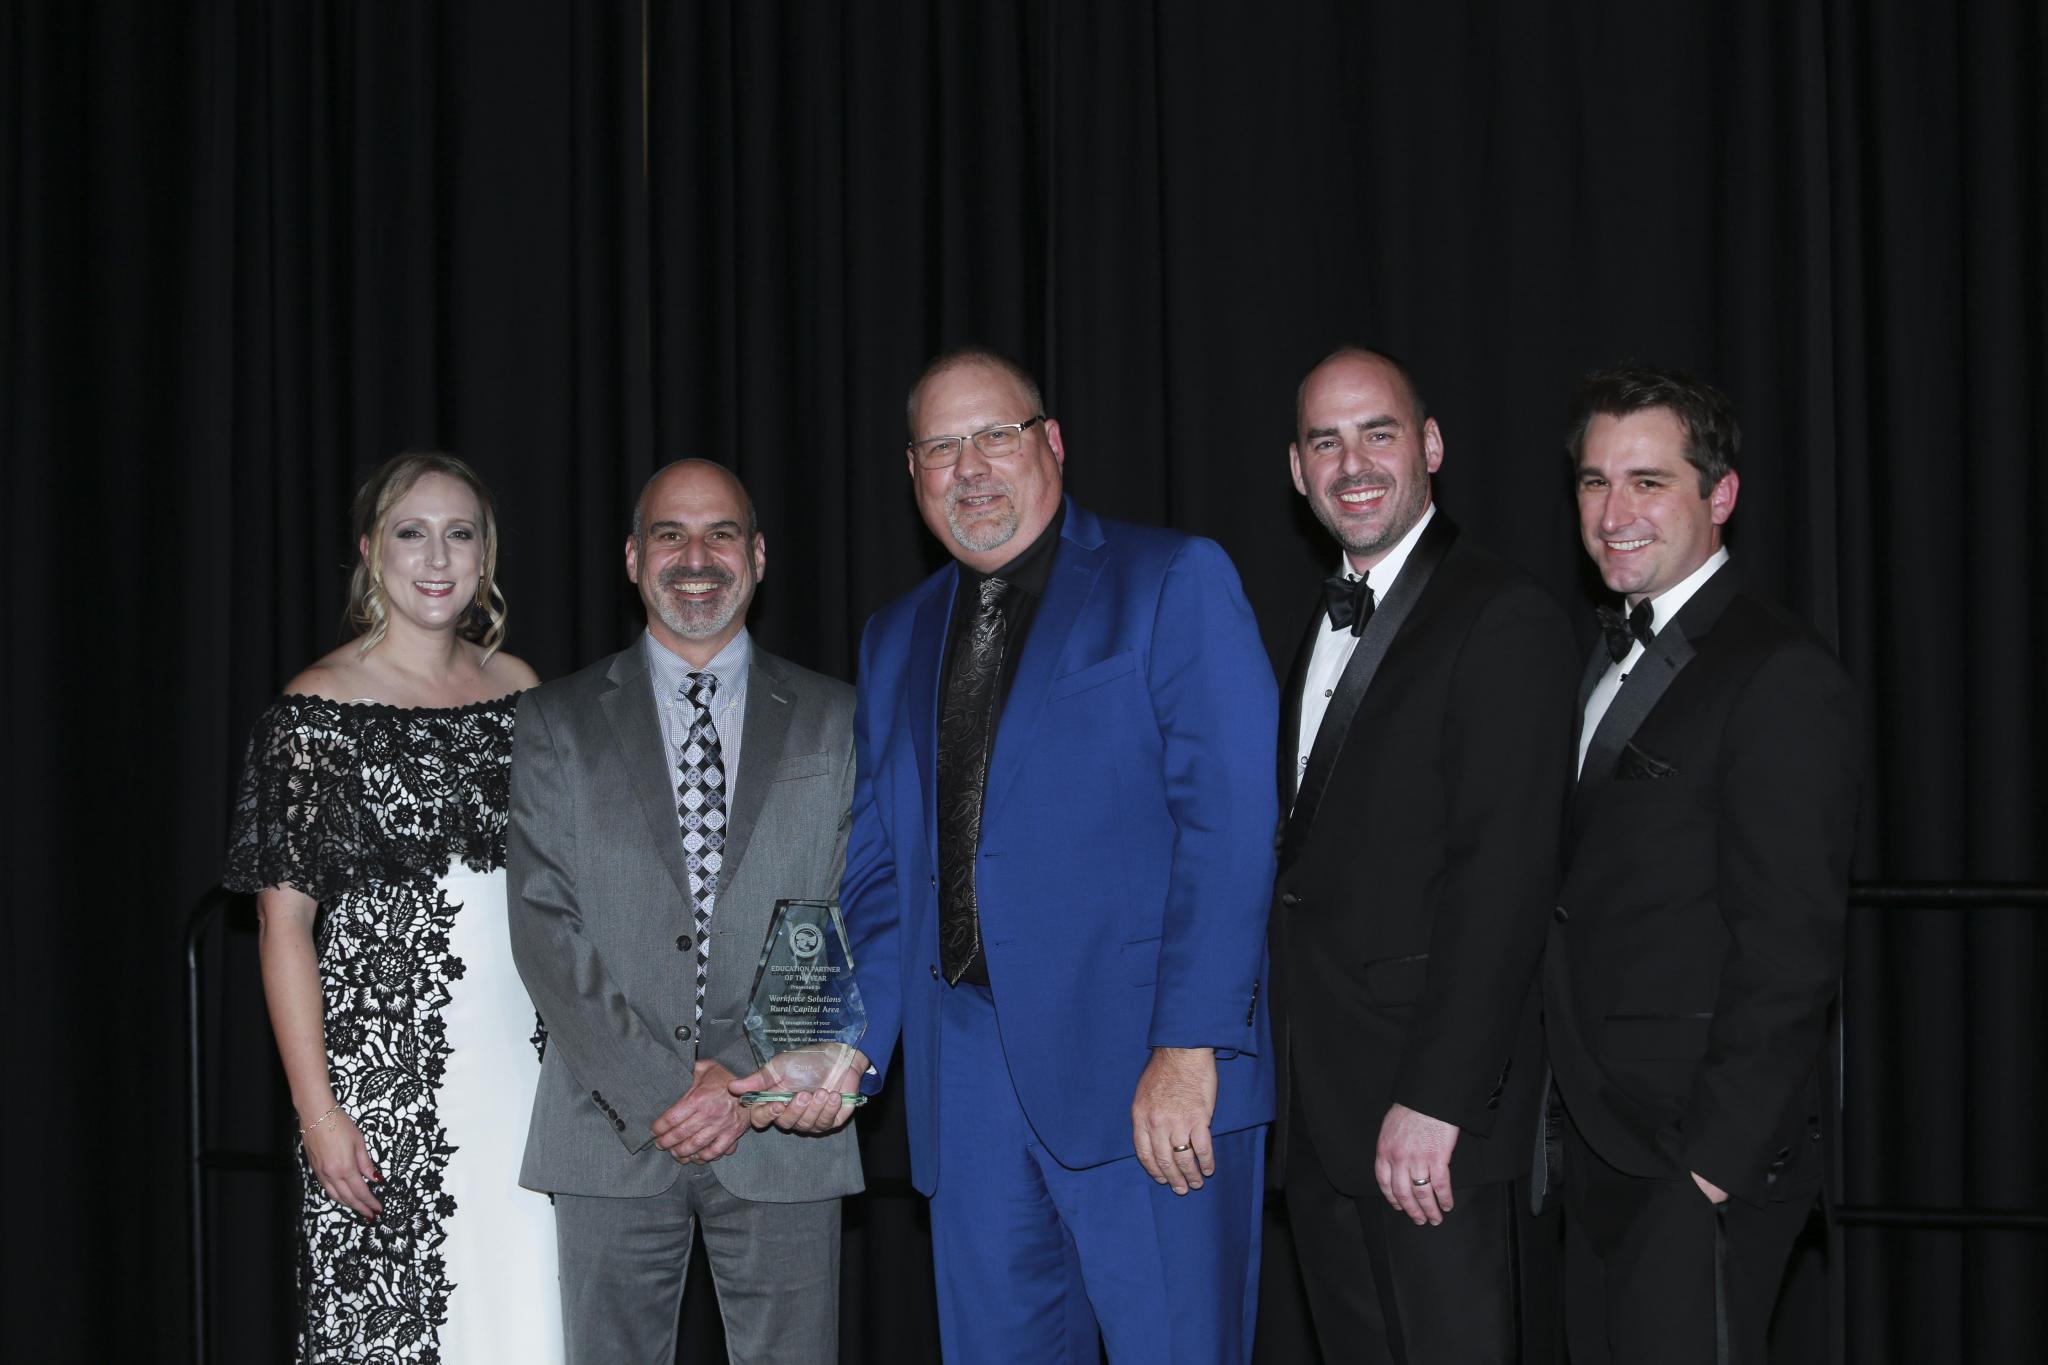 Workforce Solutions Rural Capital Area received the Education Partner of the Year honor.